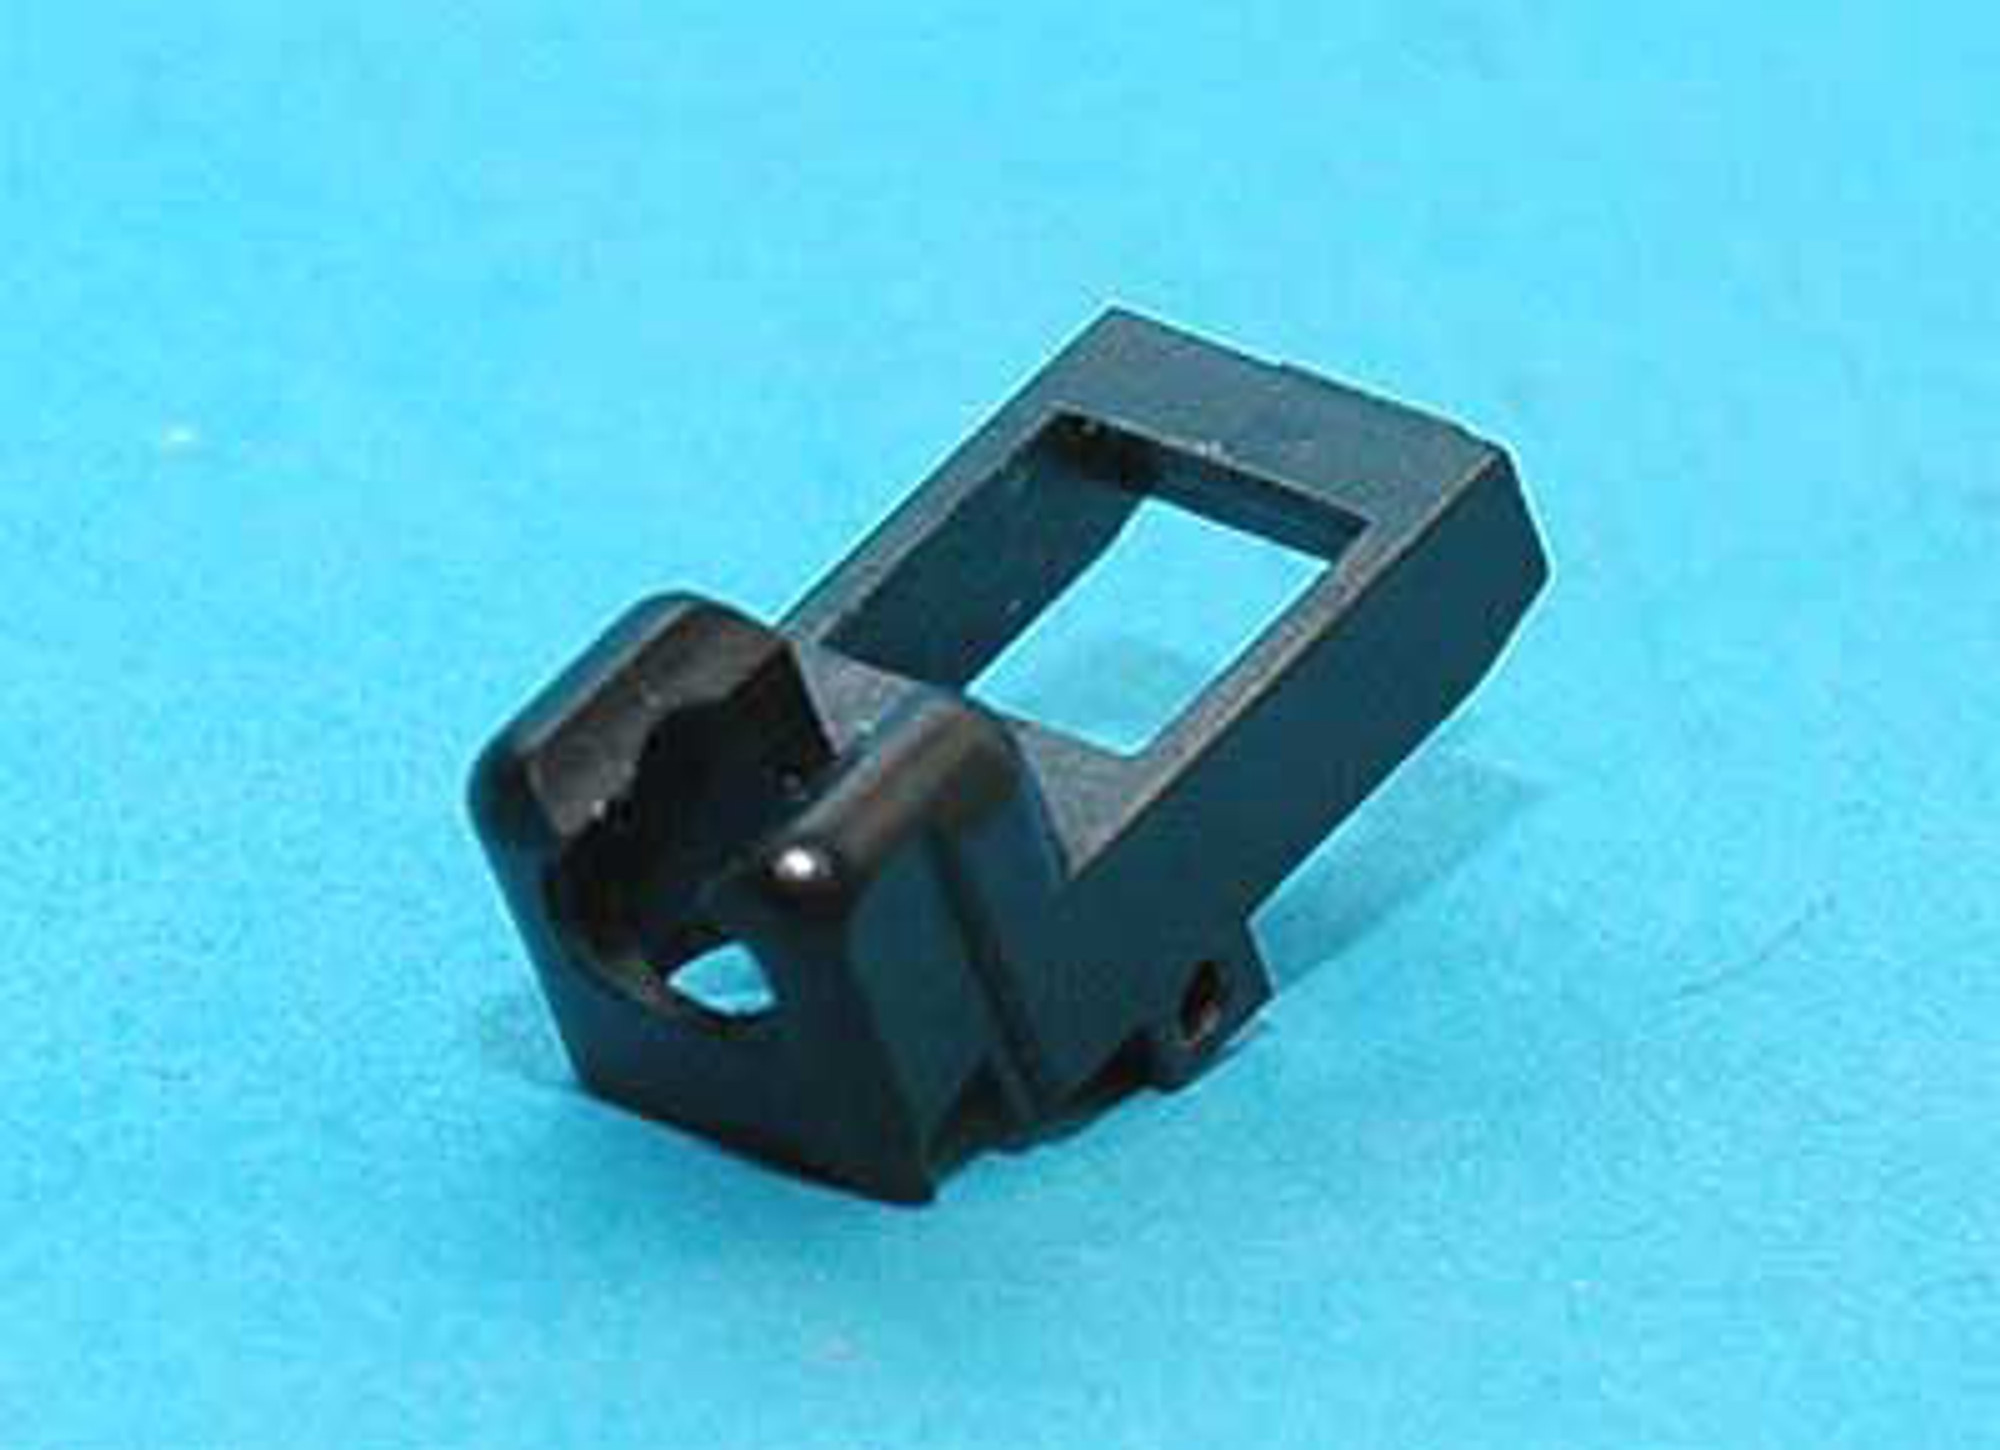 Enhanced Spare Magazine Lip for KSC KWA G 17 18C 19 23 26 34 Series Airsoft Gas Blowback